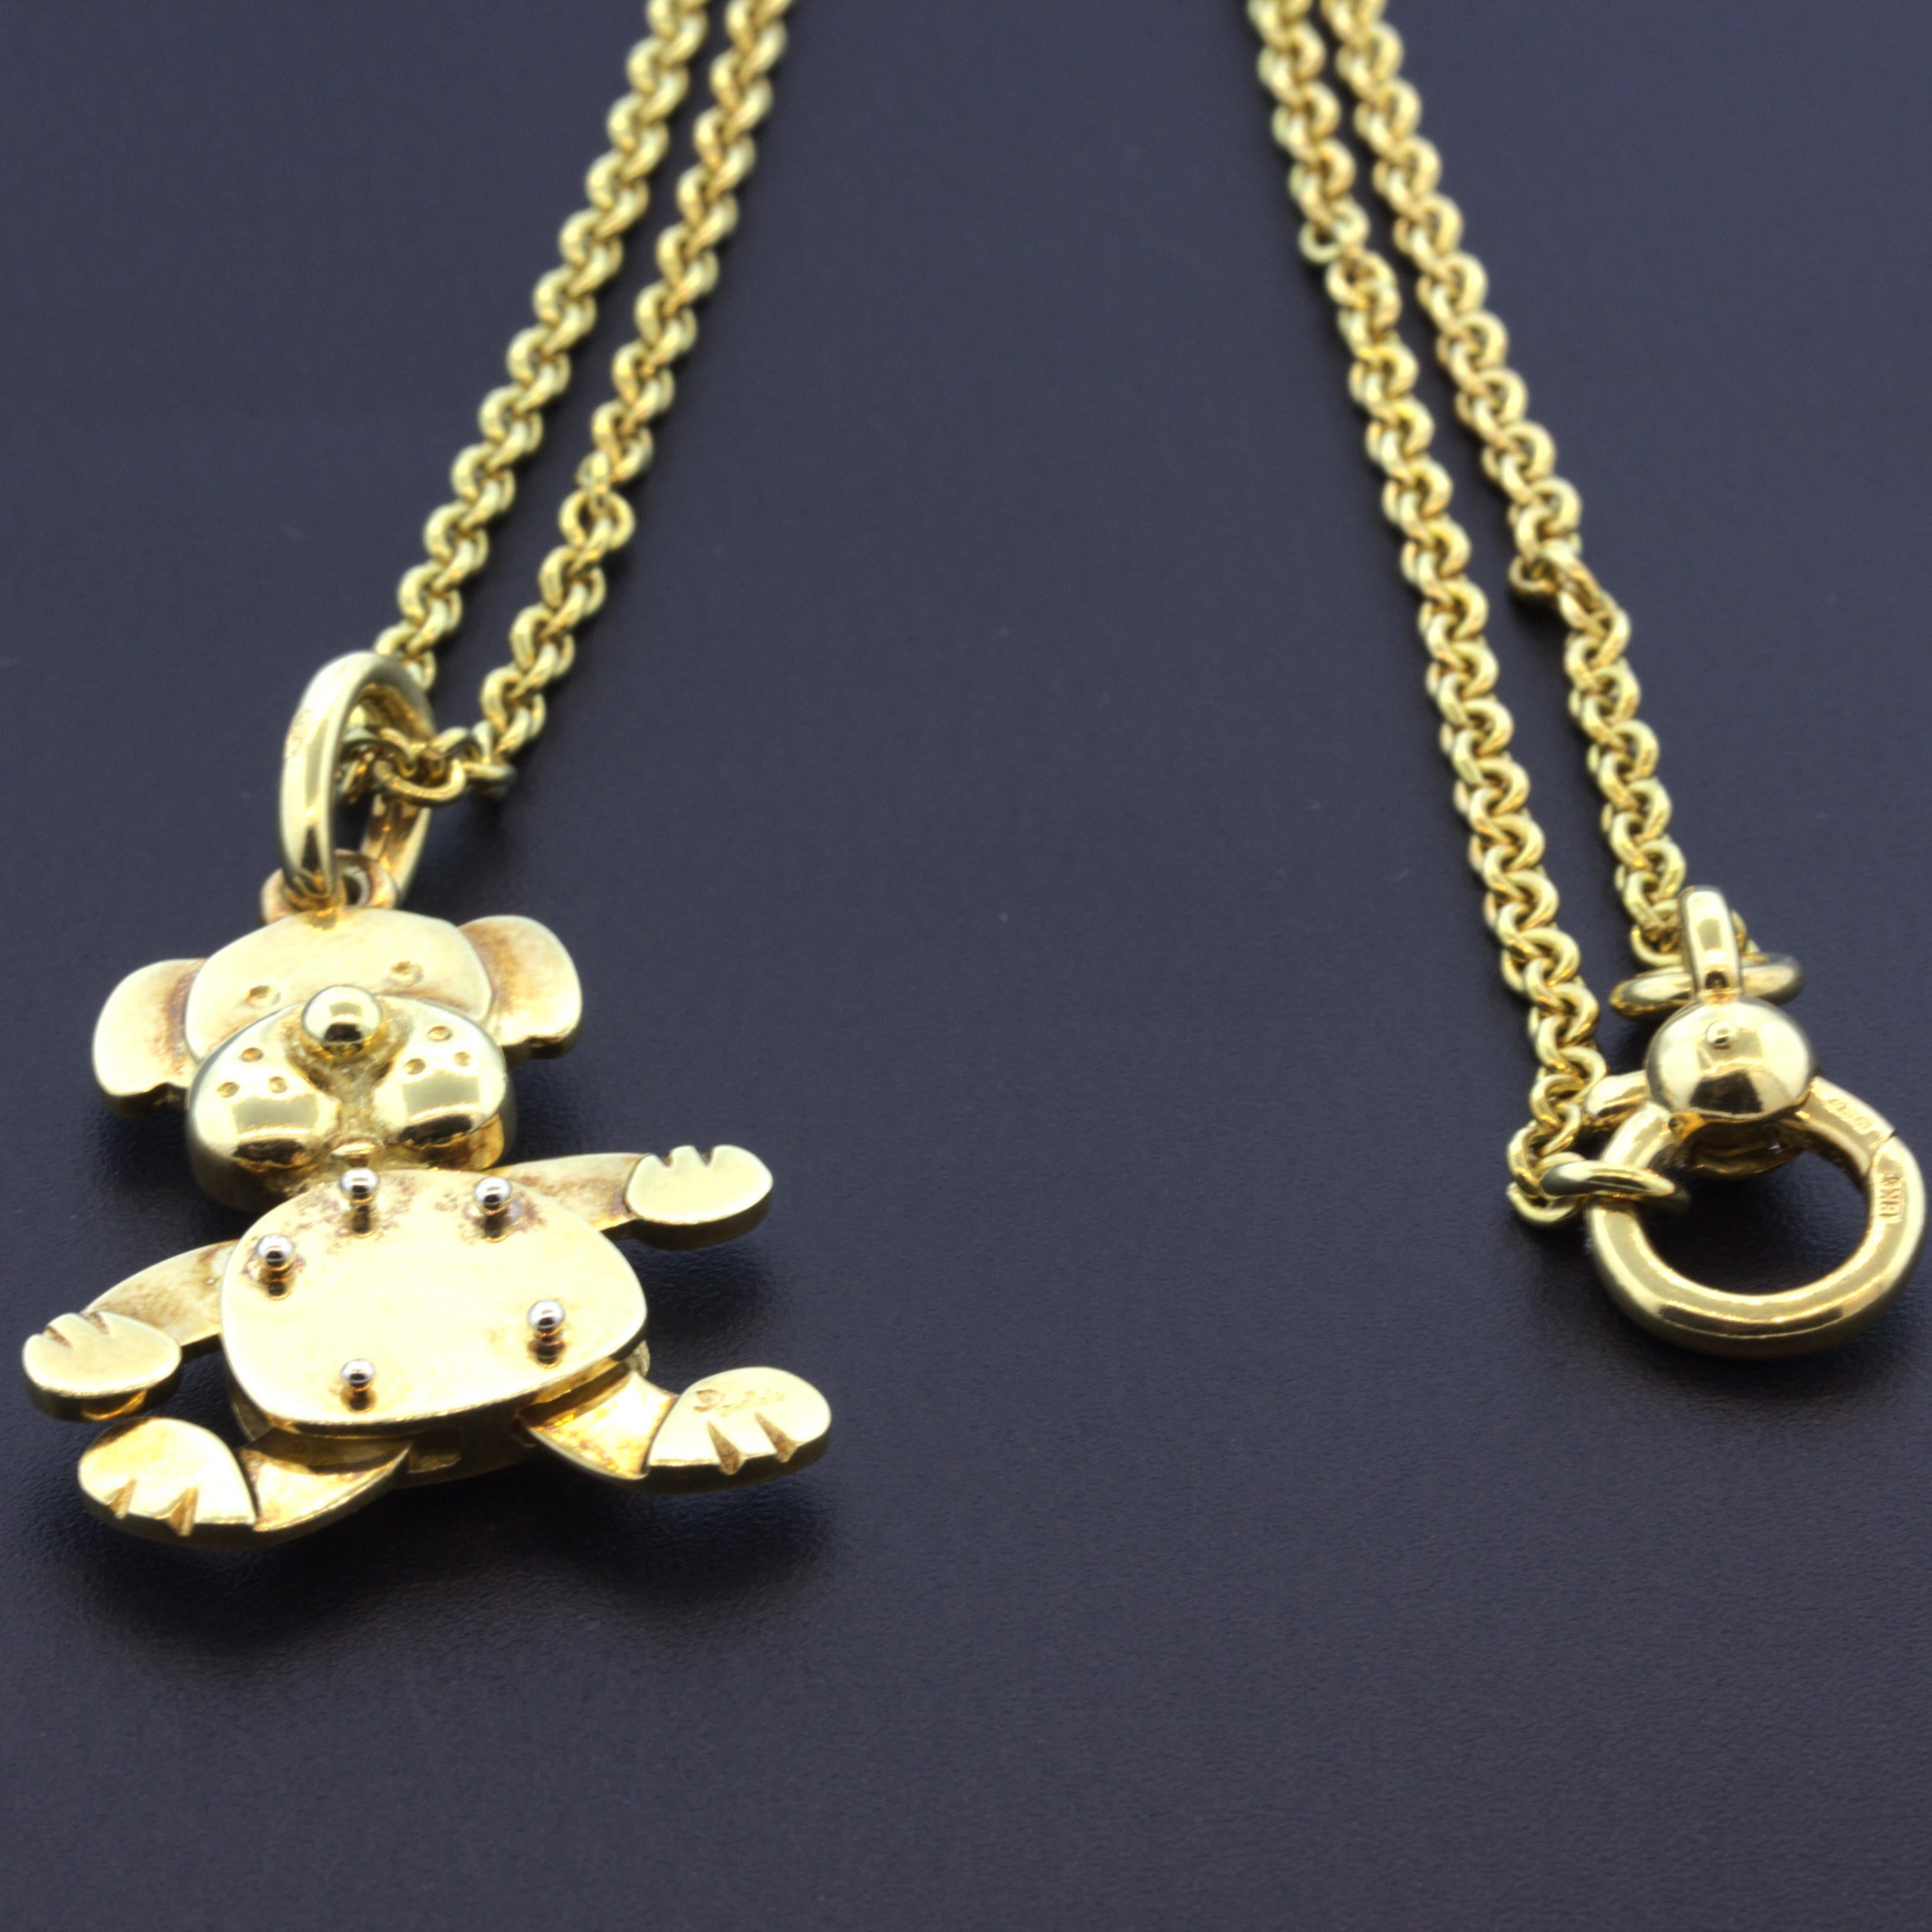 A stylish pendant from Italian designer Pomellato. It features an 18k yellow gold dog with hands and feet that move freely. It comes with an original 18k yellow gold necklace by Pomellato as well. Made in 18k yellow gold and ready to be